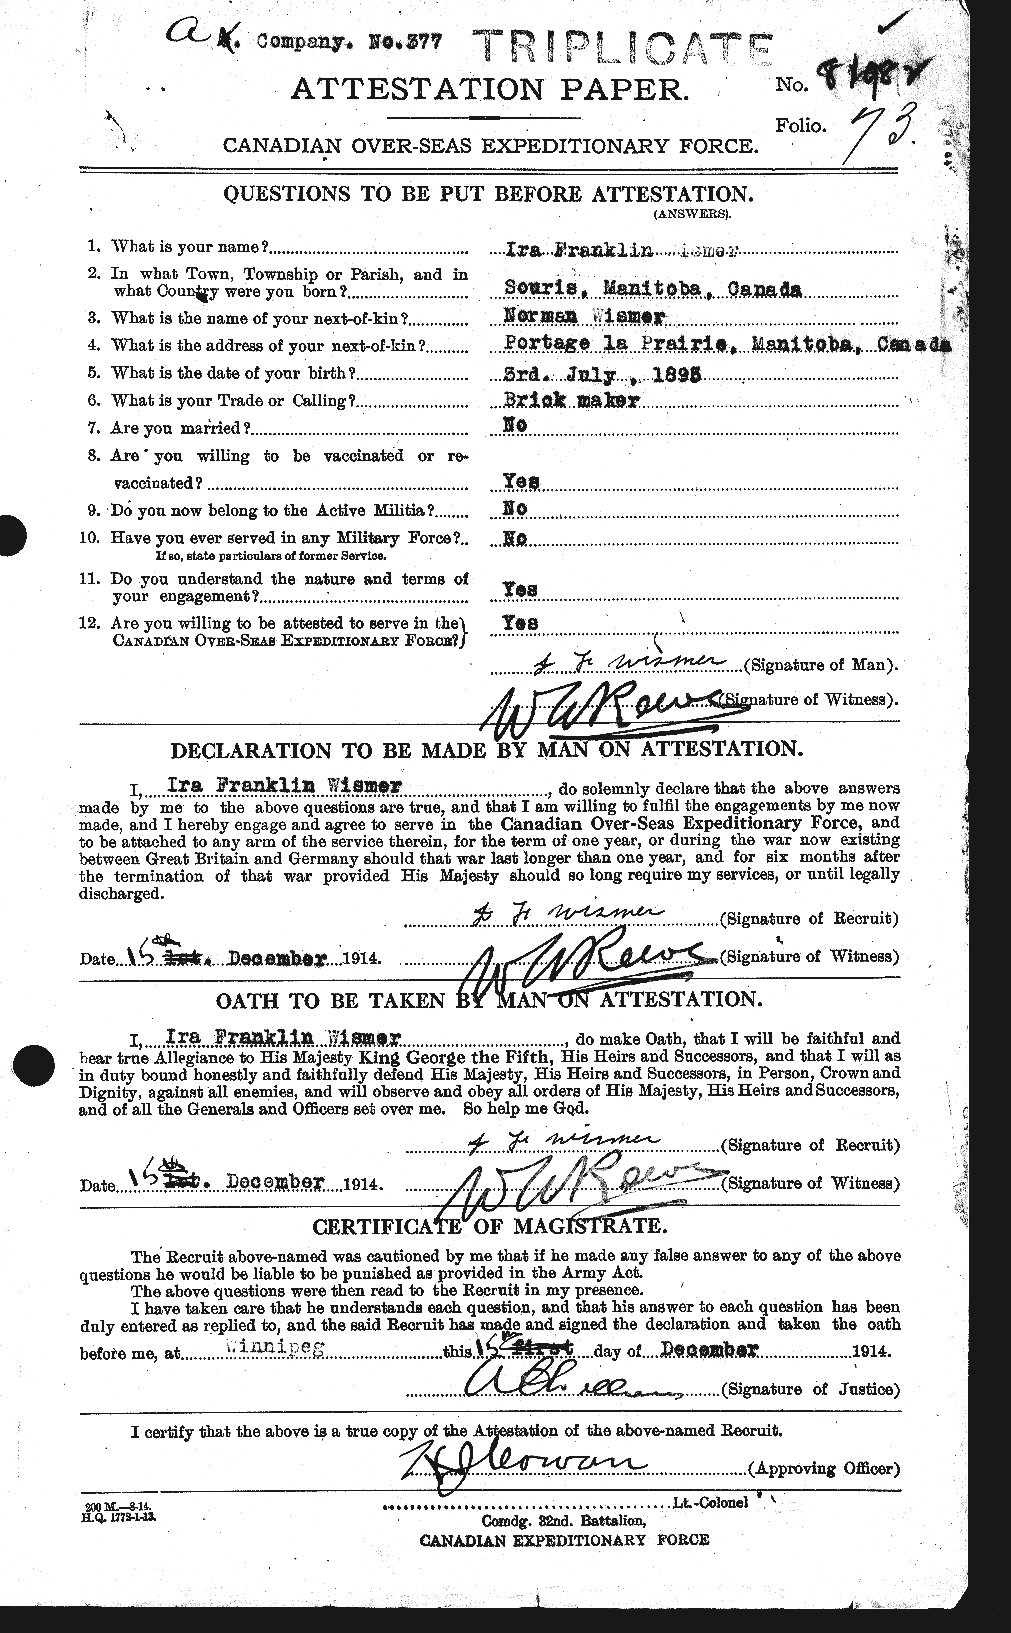 Personnel Records of the First World War - CEF 200642a